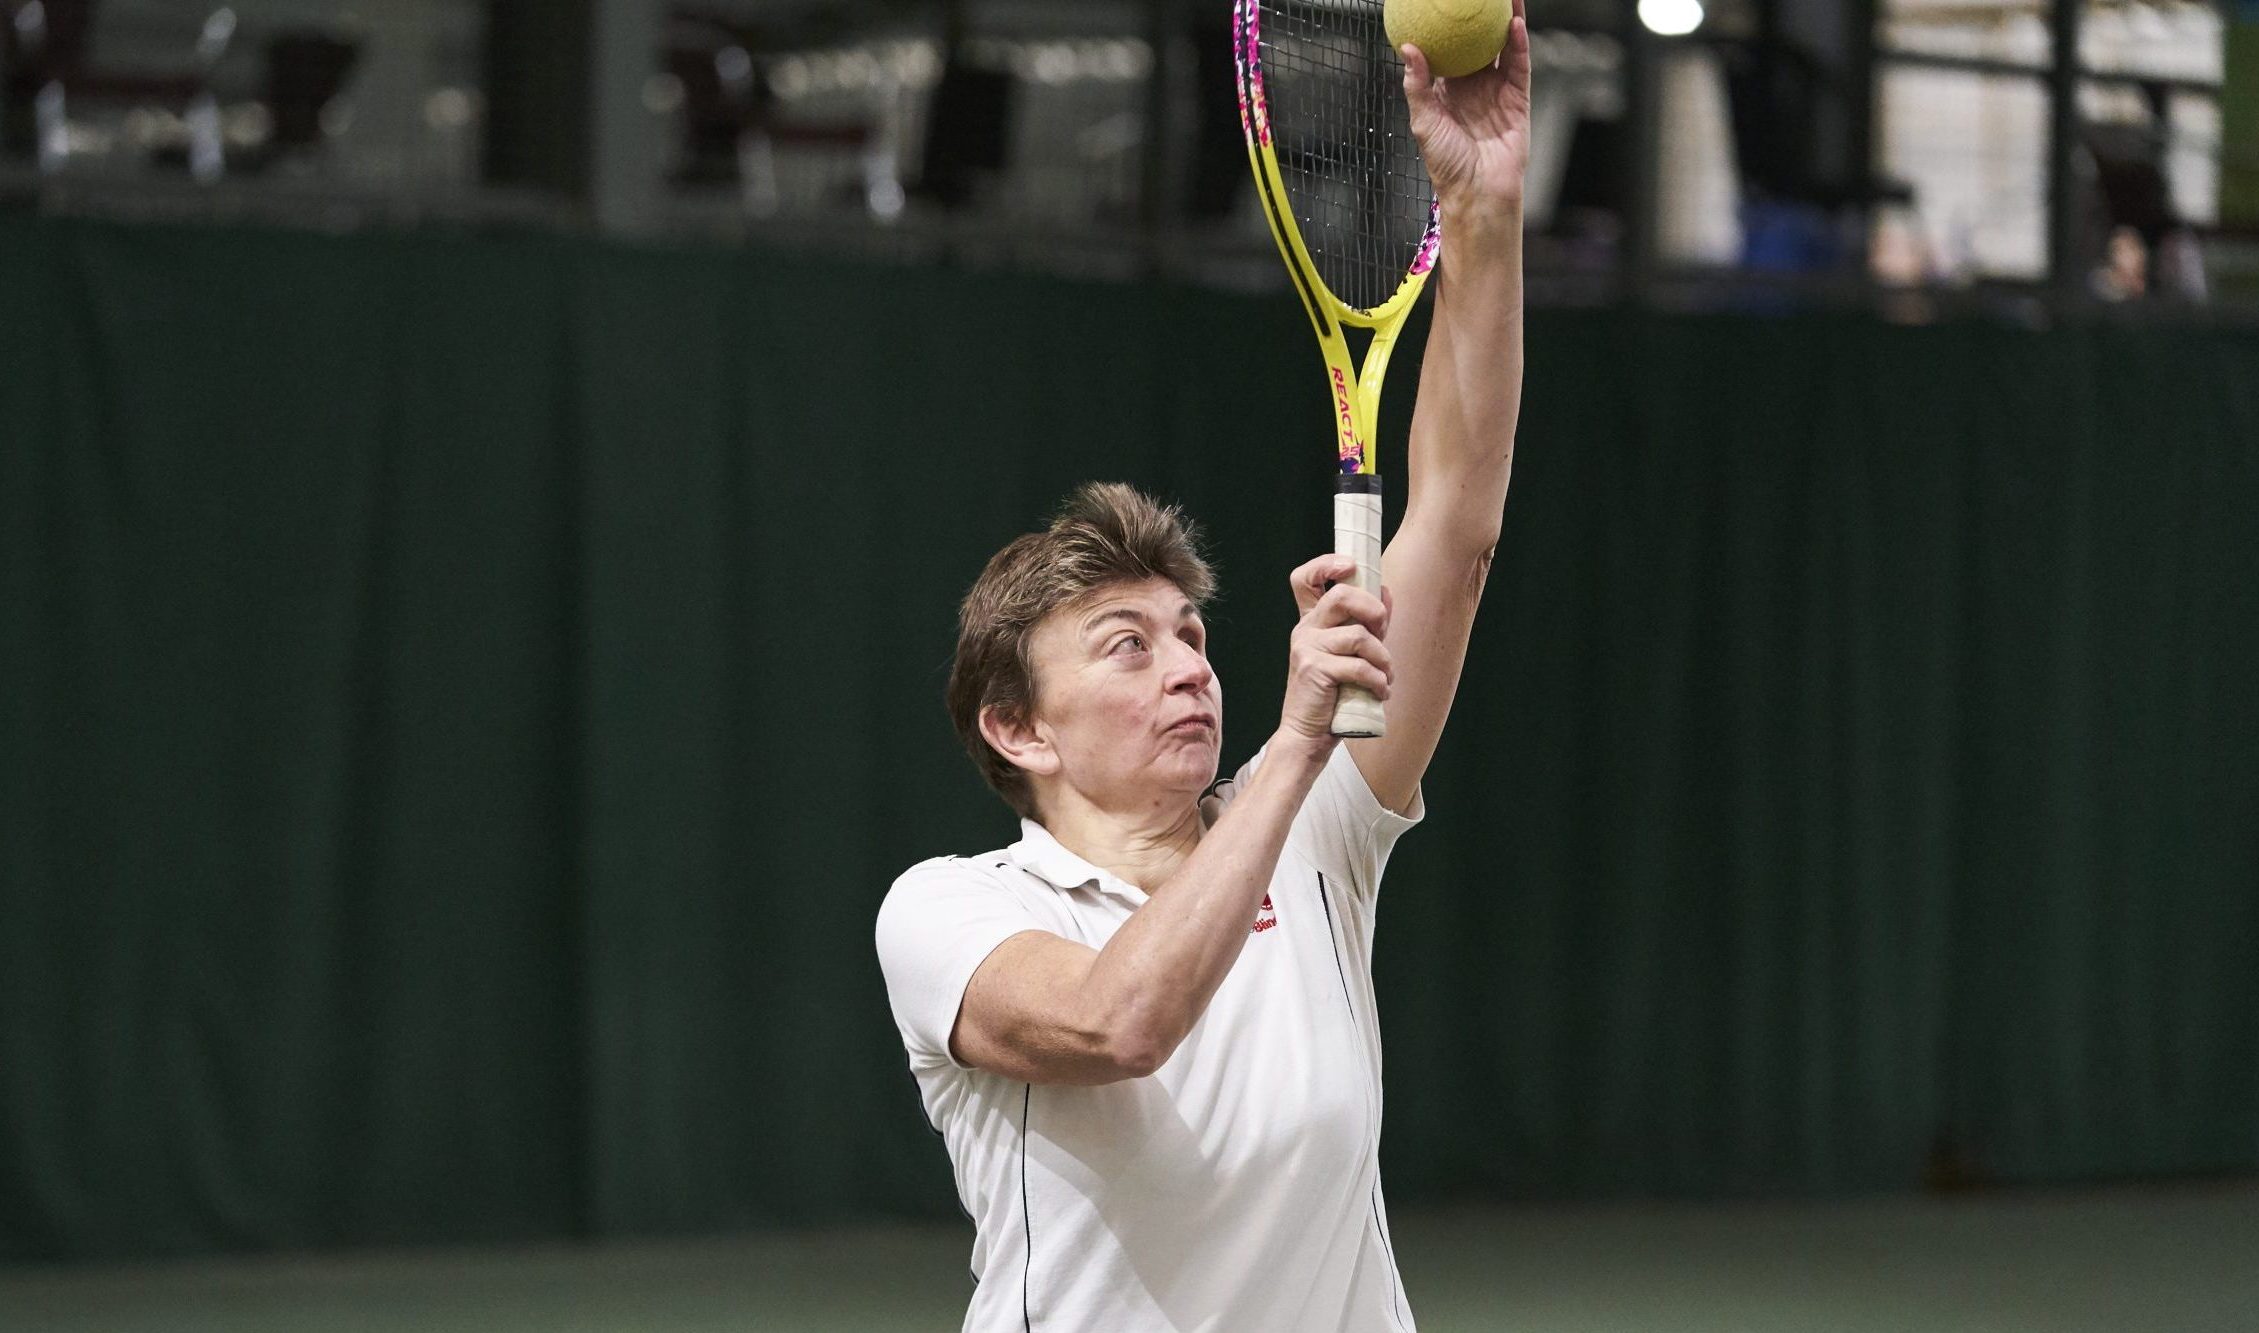 White woman with visual impairment playing tennis